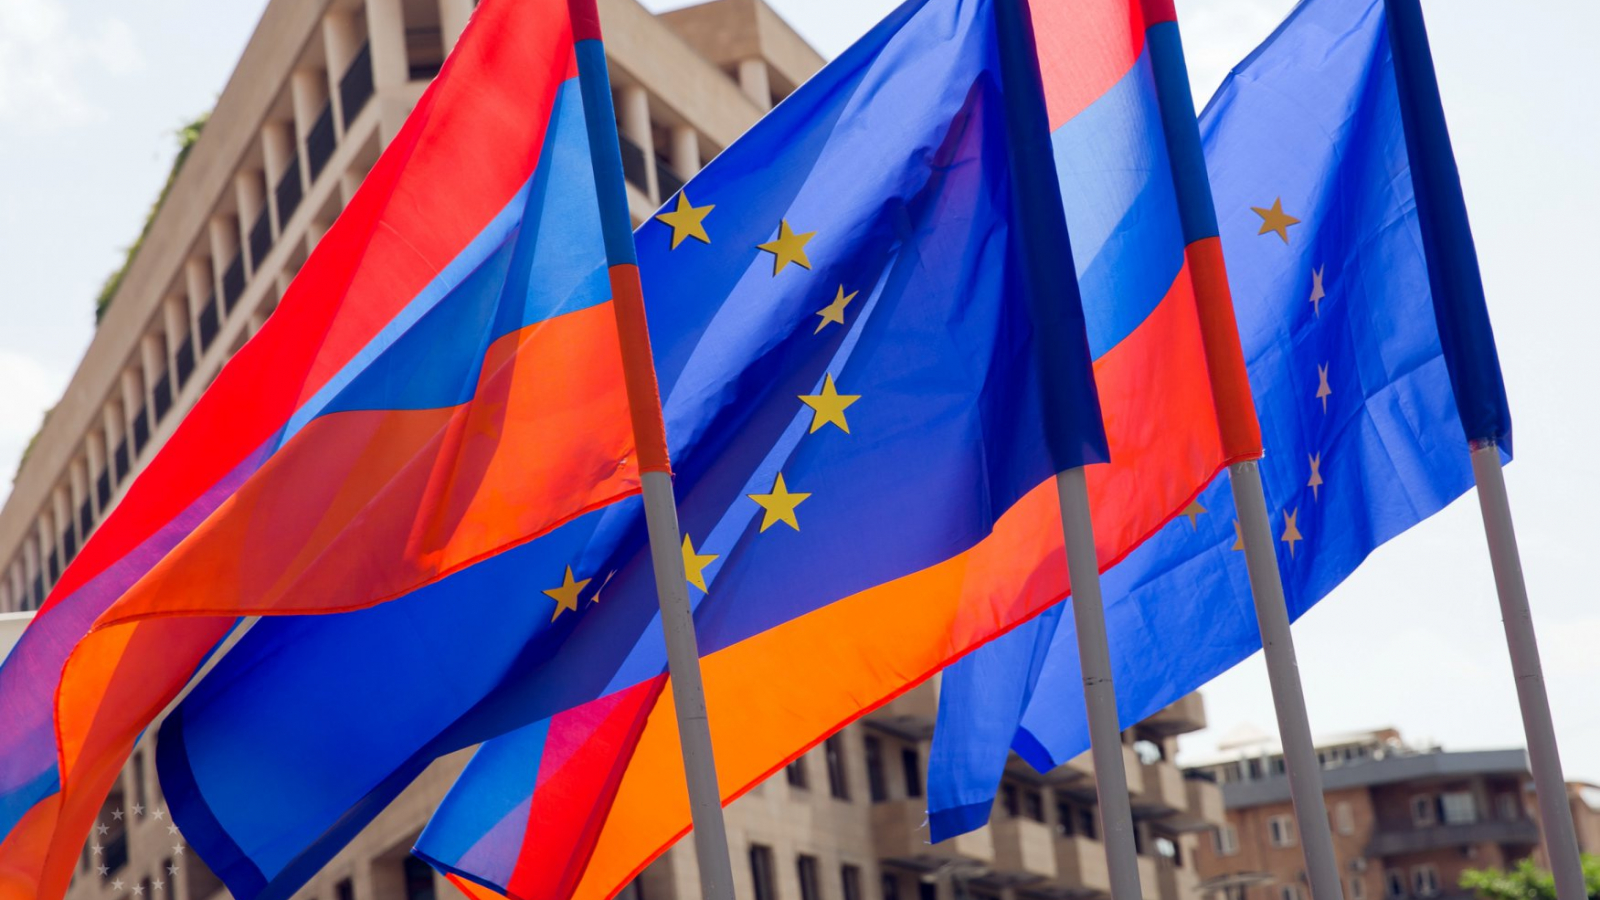 Sajid Karim: New political landscape within National Assembly of Armenia brings additional responsibility for government to implement its reform agenda notably as regards to the electoral framework and fight against corruption